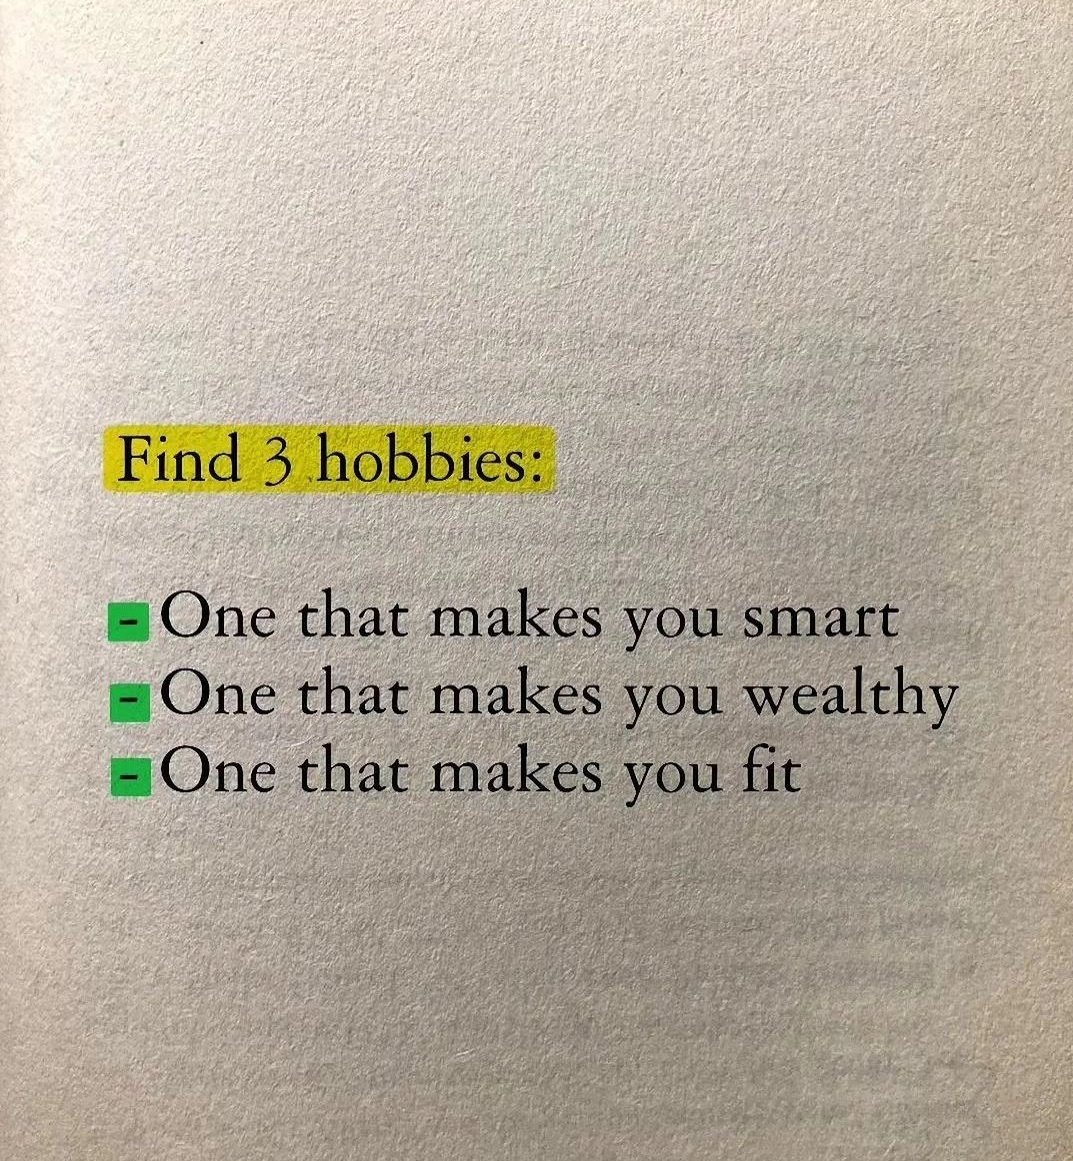 3 hobbies for life.